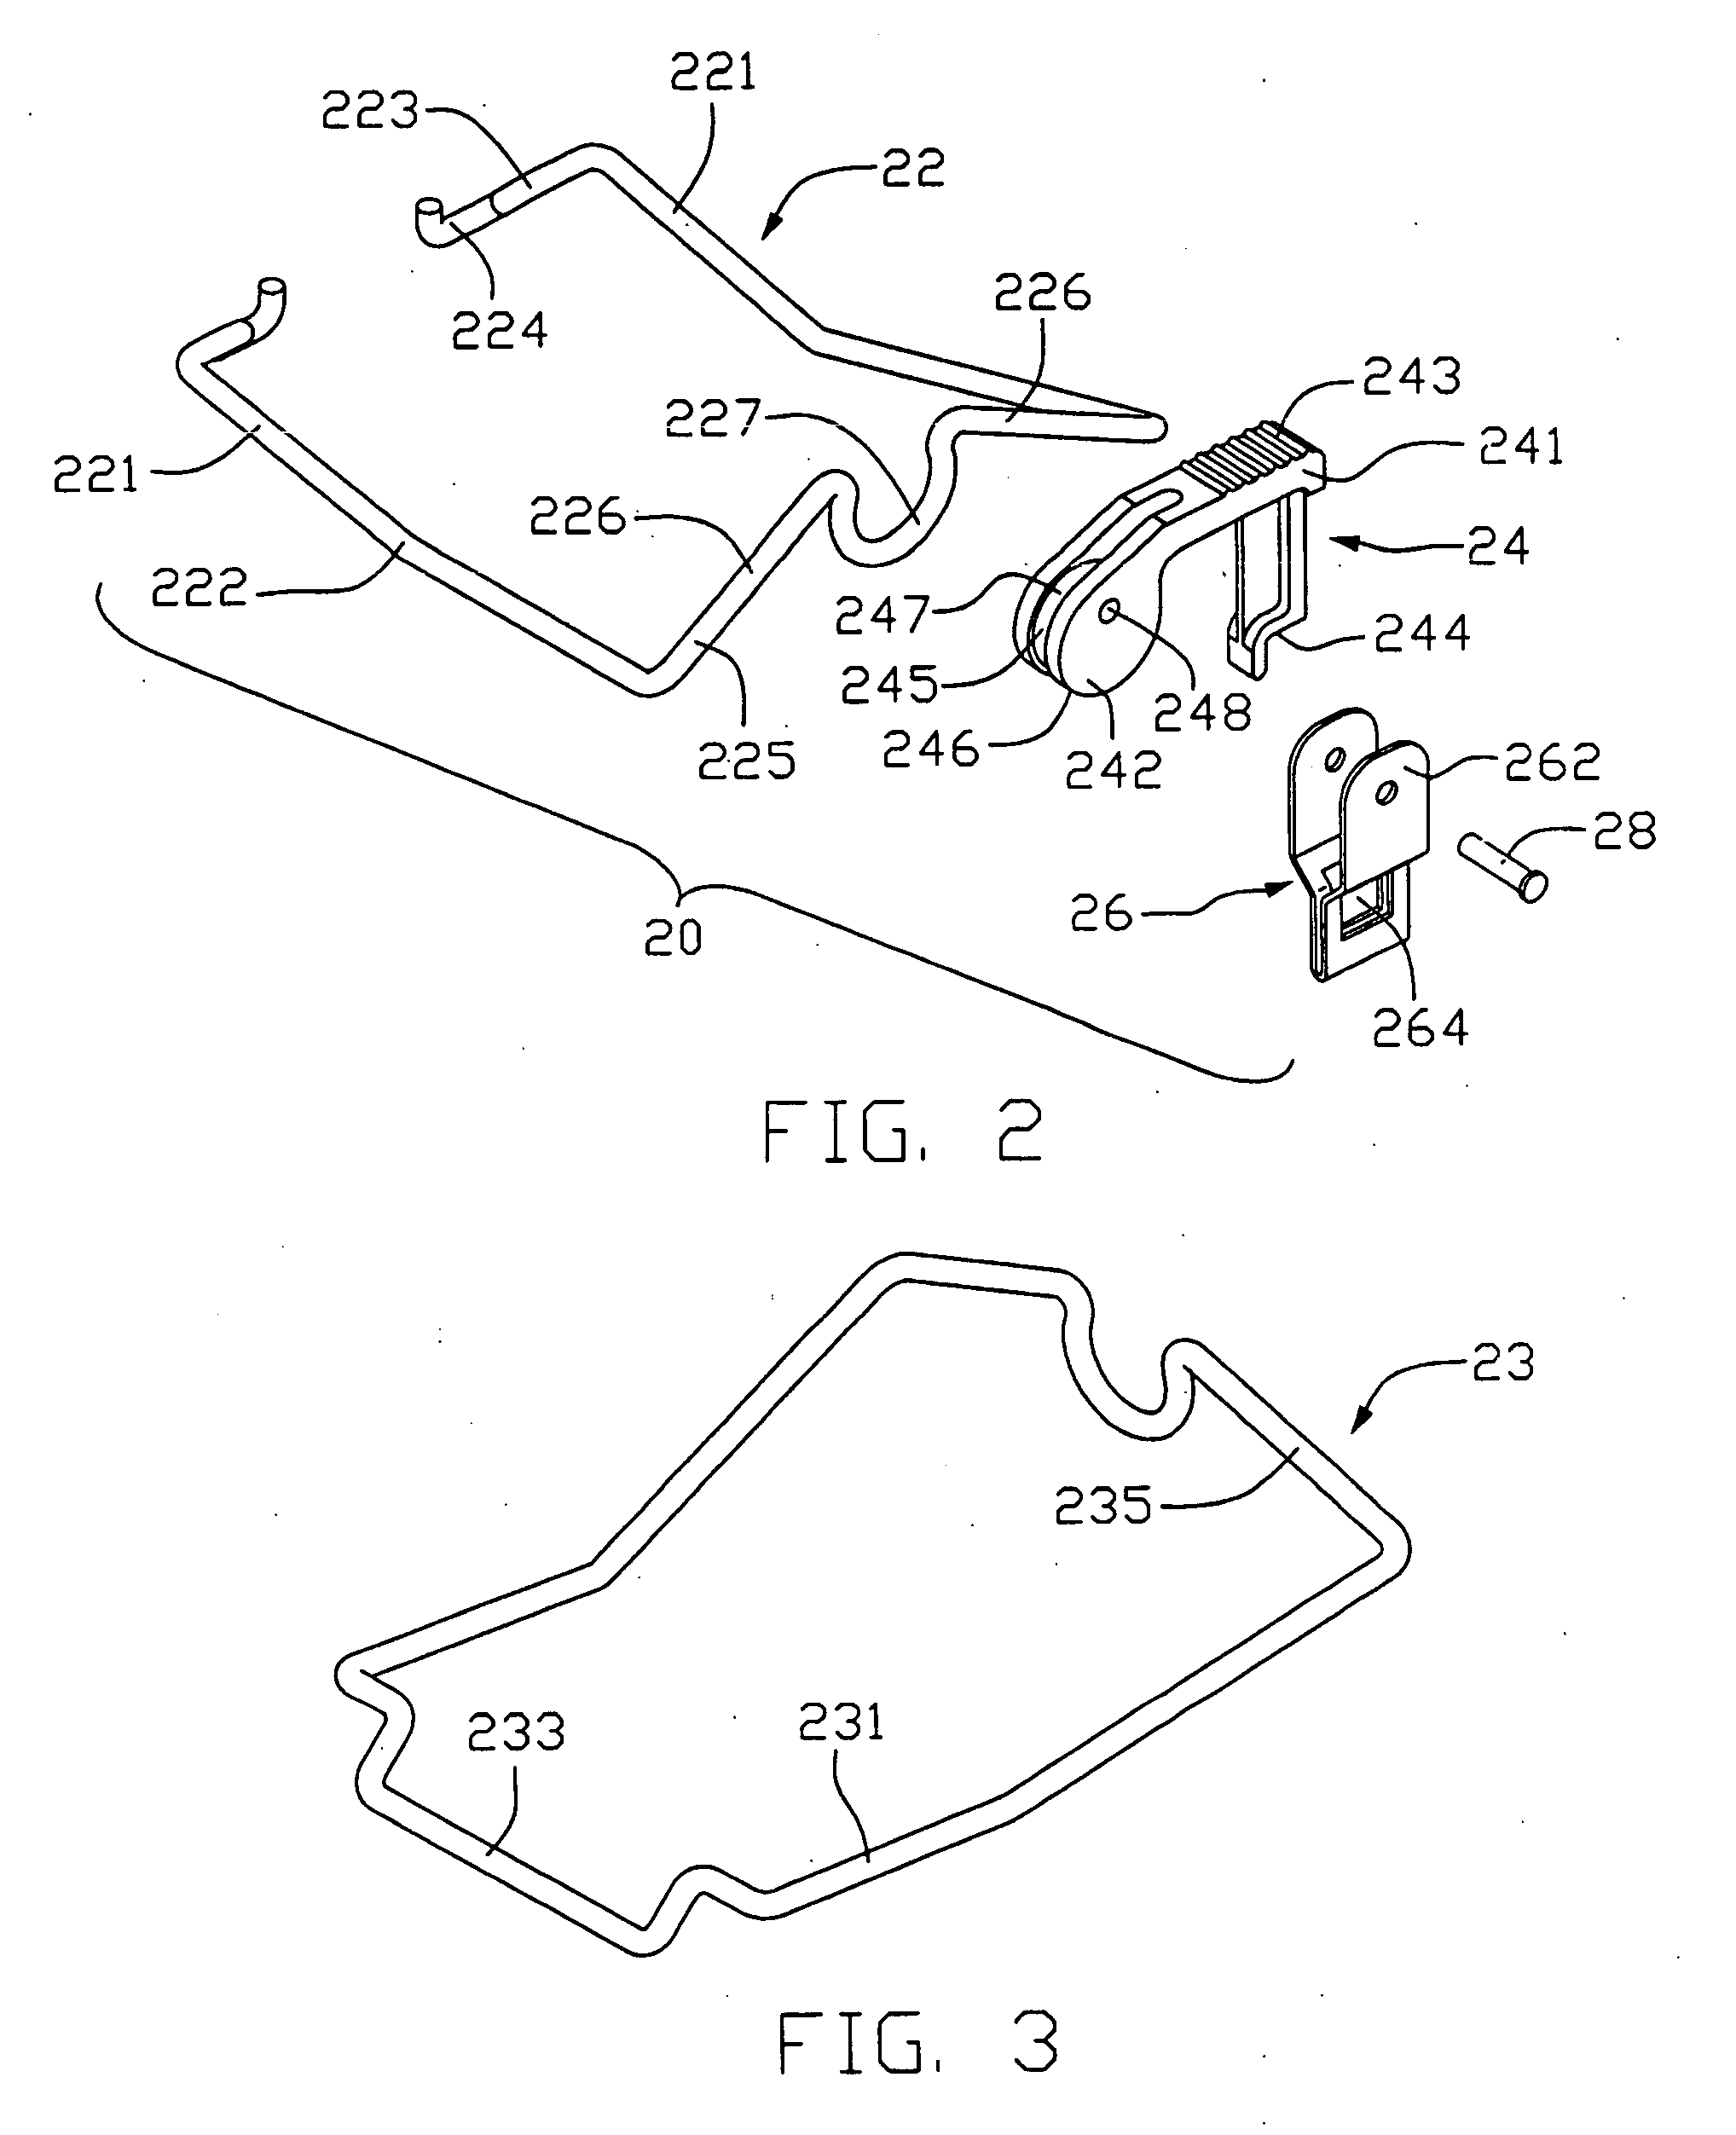 Retaining device for heat sink